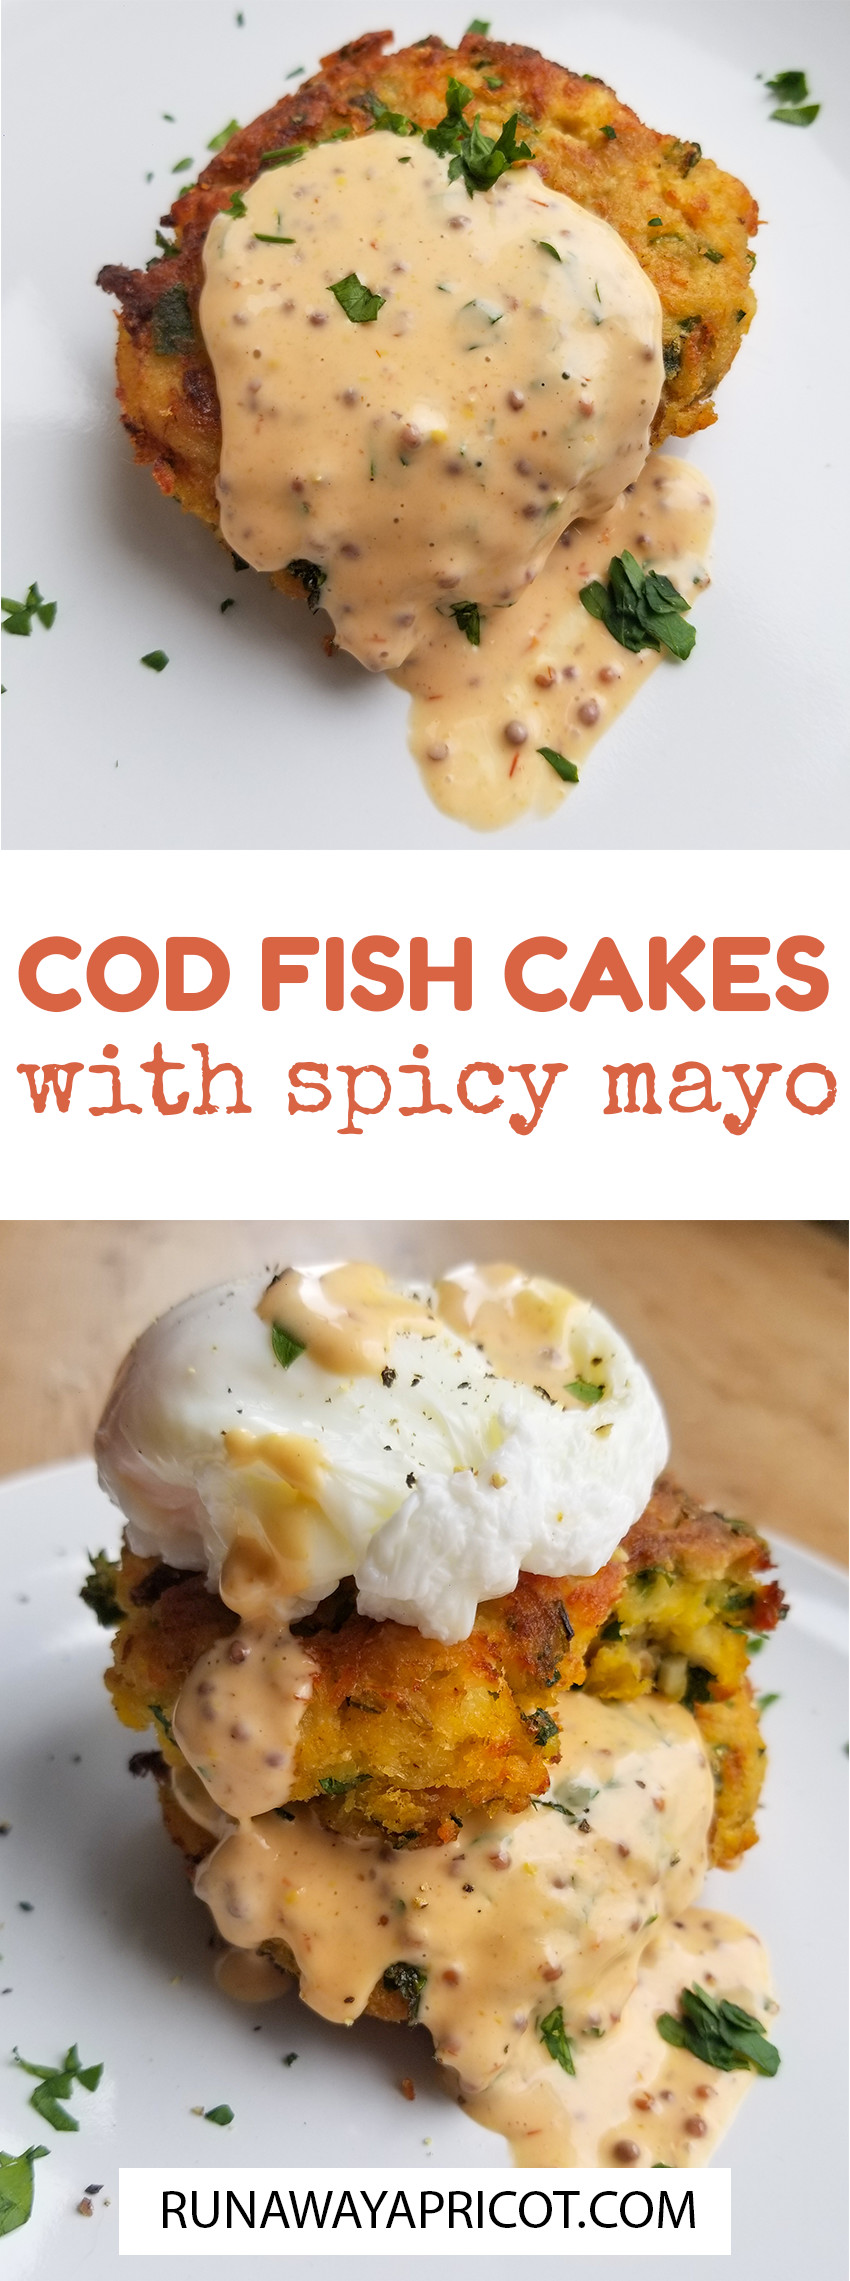 Cod Fish Cakes with Spicy Mayo